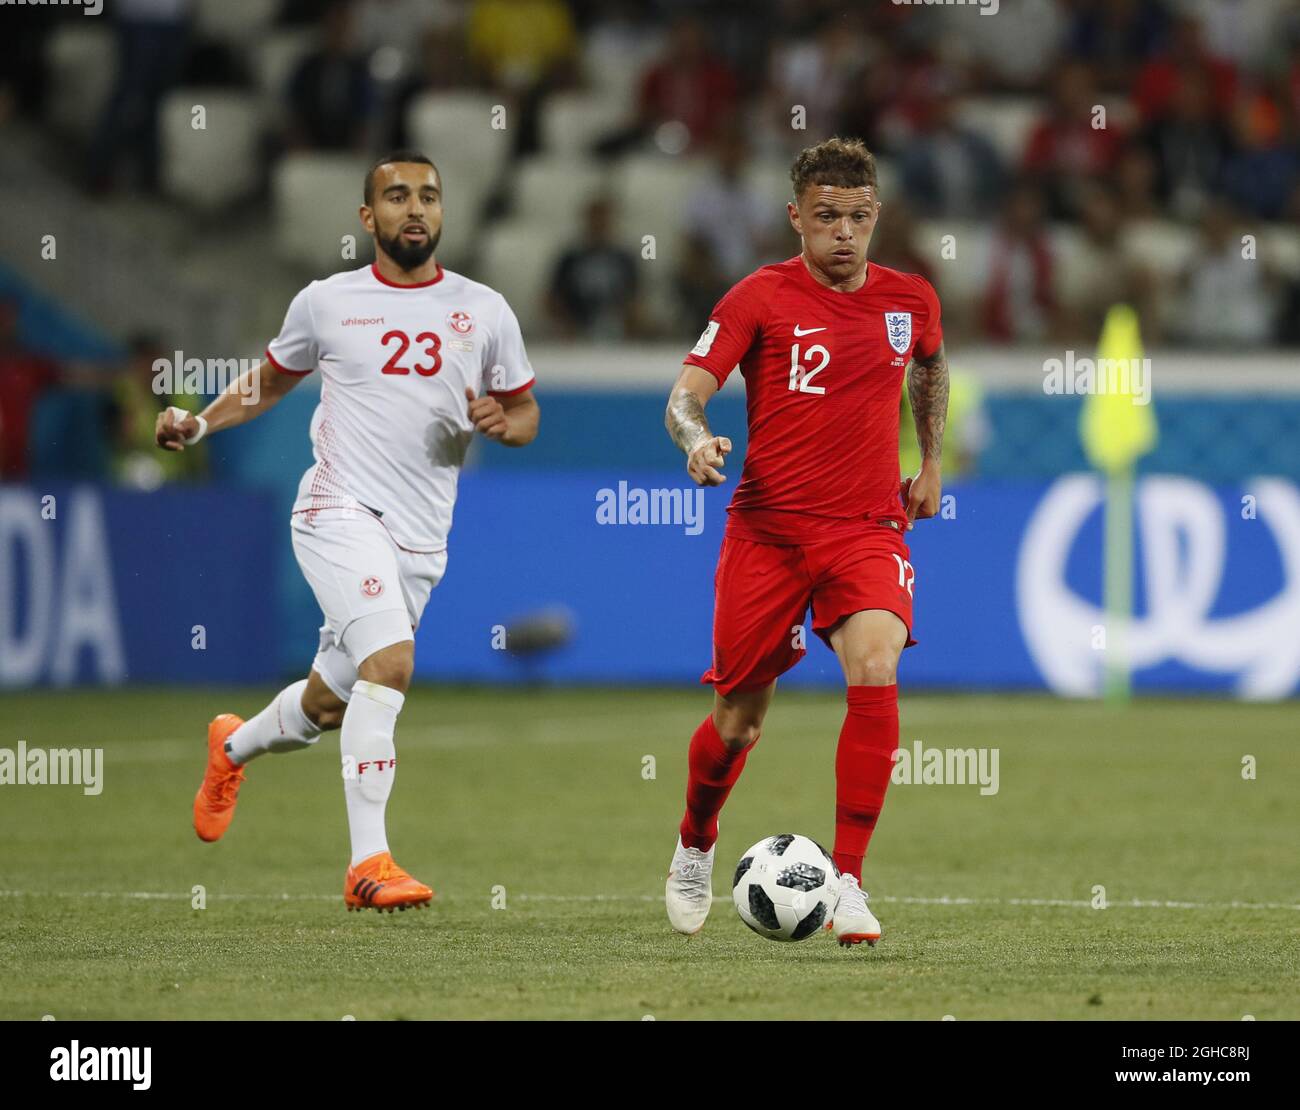 Naim Sliti of Tunisia and Kieran Trippier of England during the FIFA World Cup 2018 Group G match at the Volgograd Arena, Volgograd. Picture date 18th June 2018. Picture credit should read: David Klein/Sportimage via PA Images Stock Photo